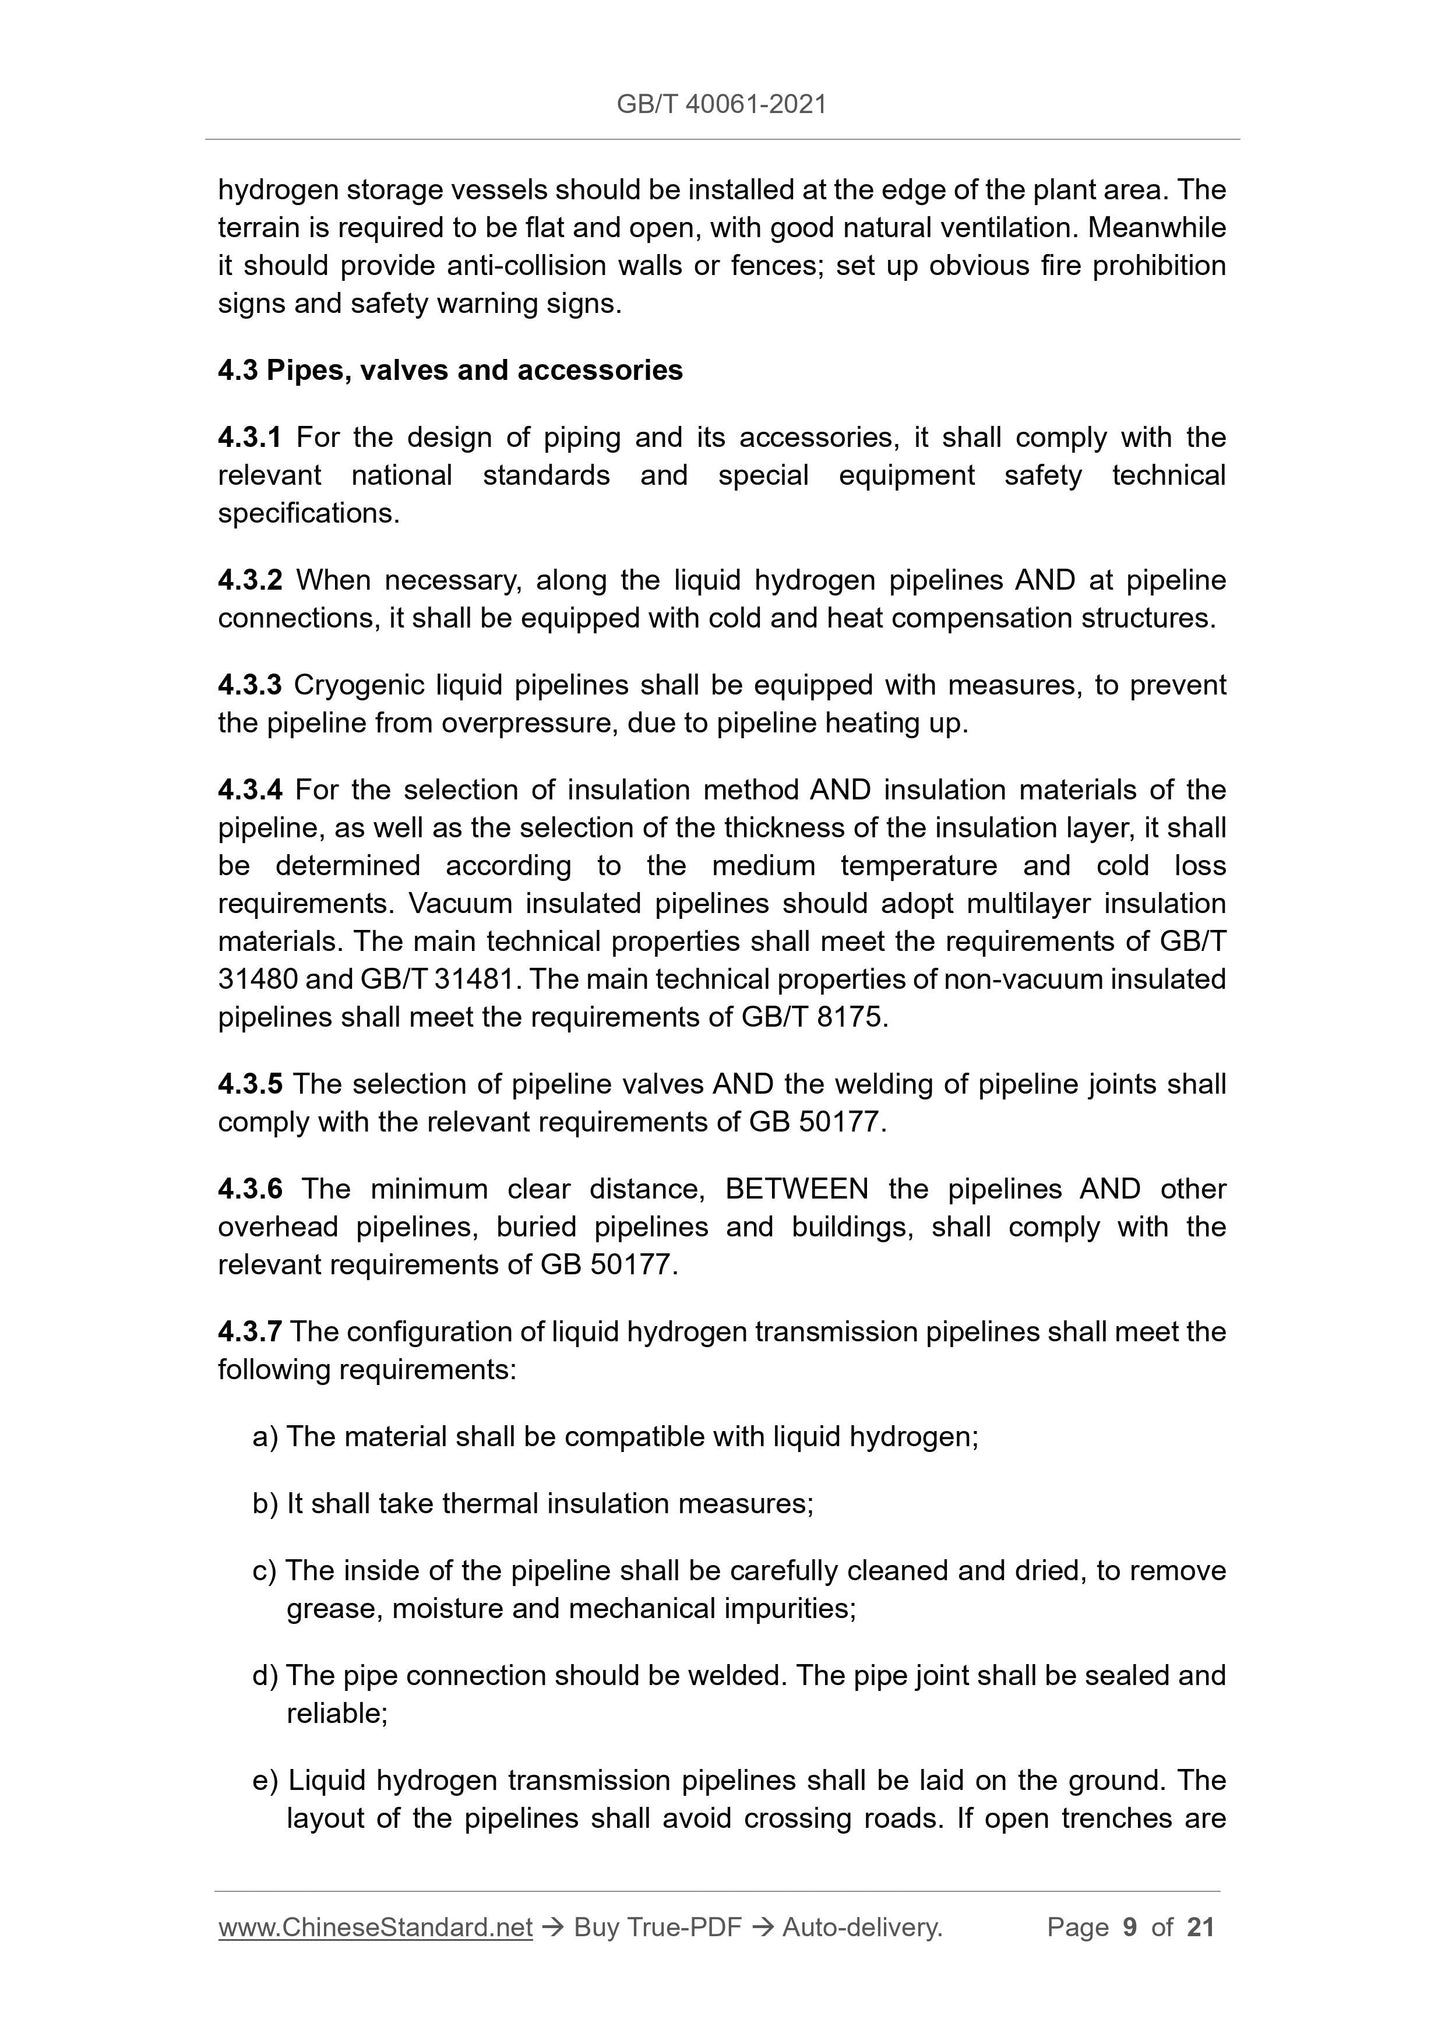 GB/T 40061-2021 Page 4